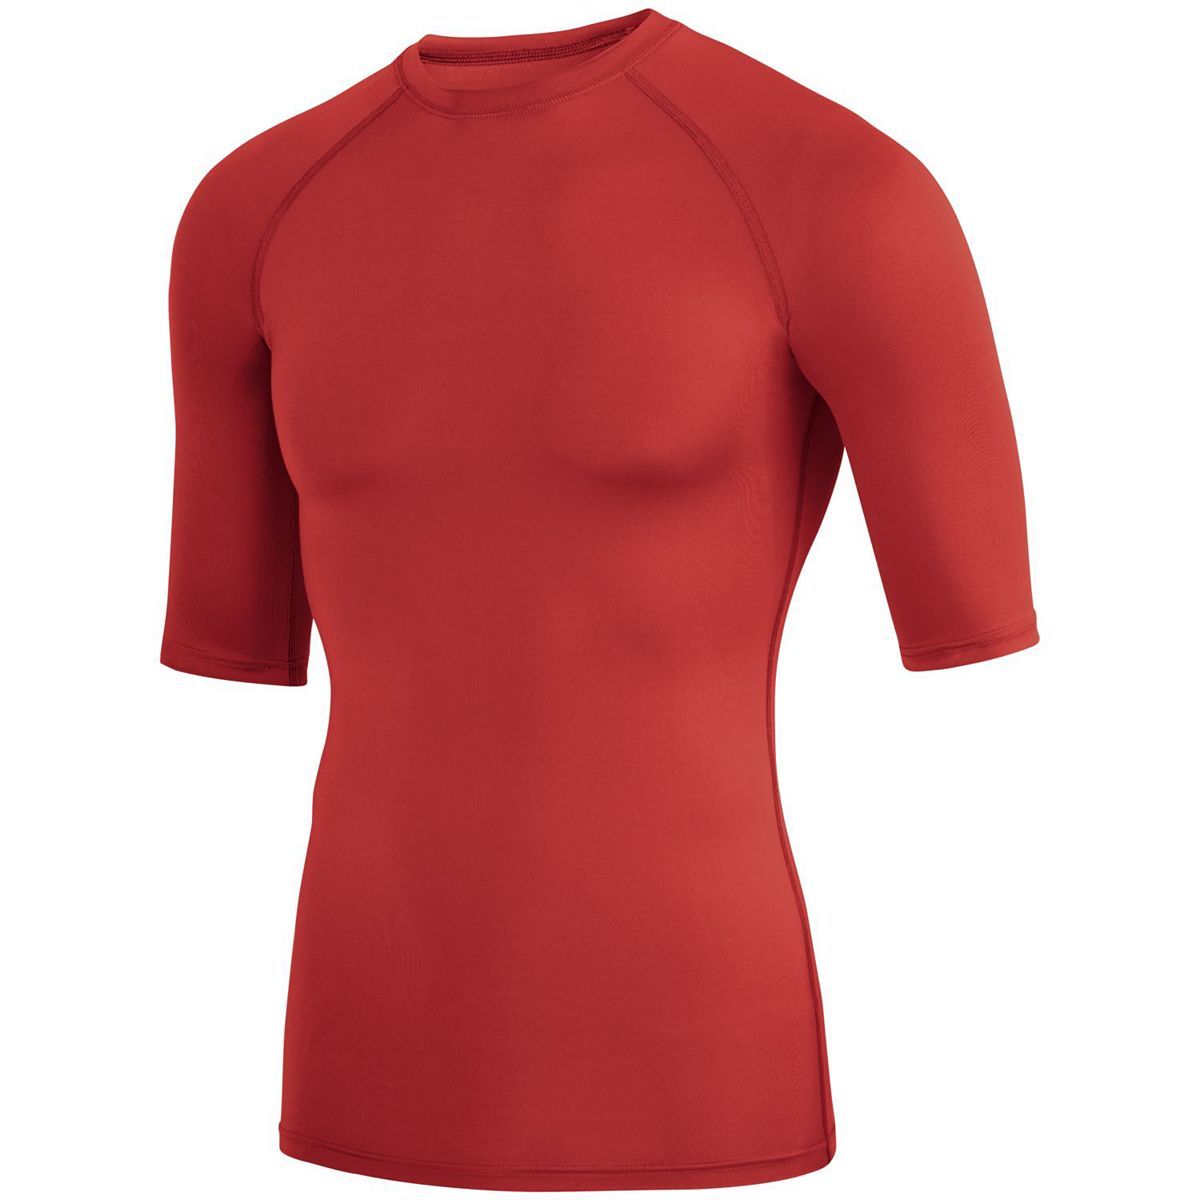 Youth Hyperform Compression Half Sleeve Tee - 2607